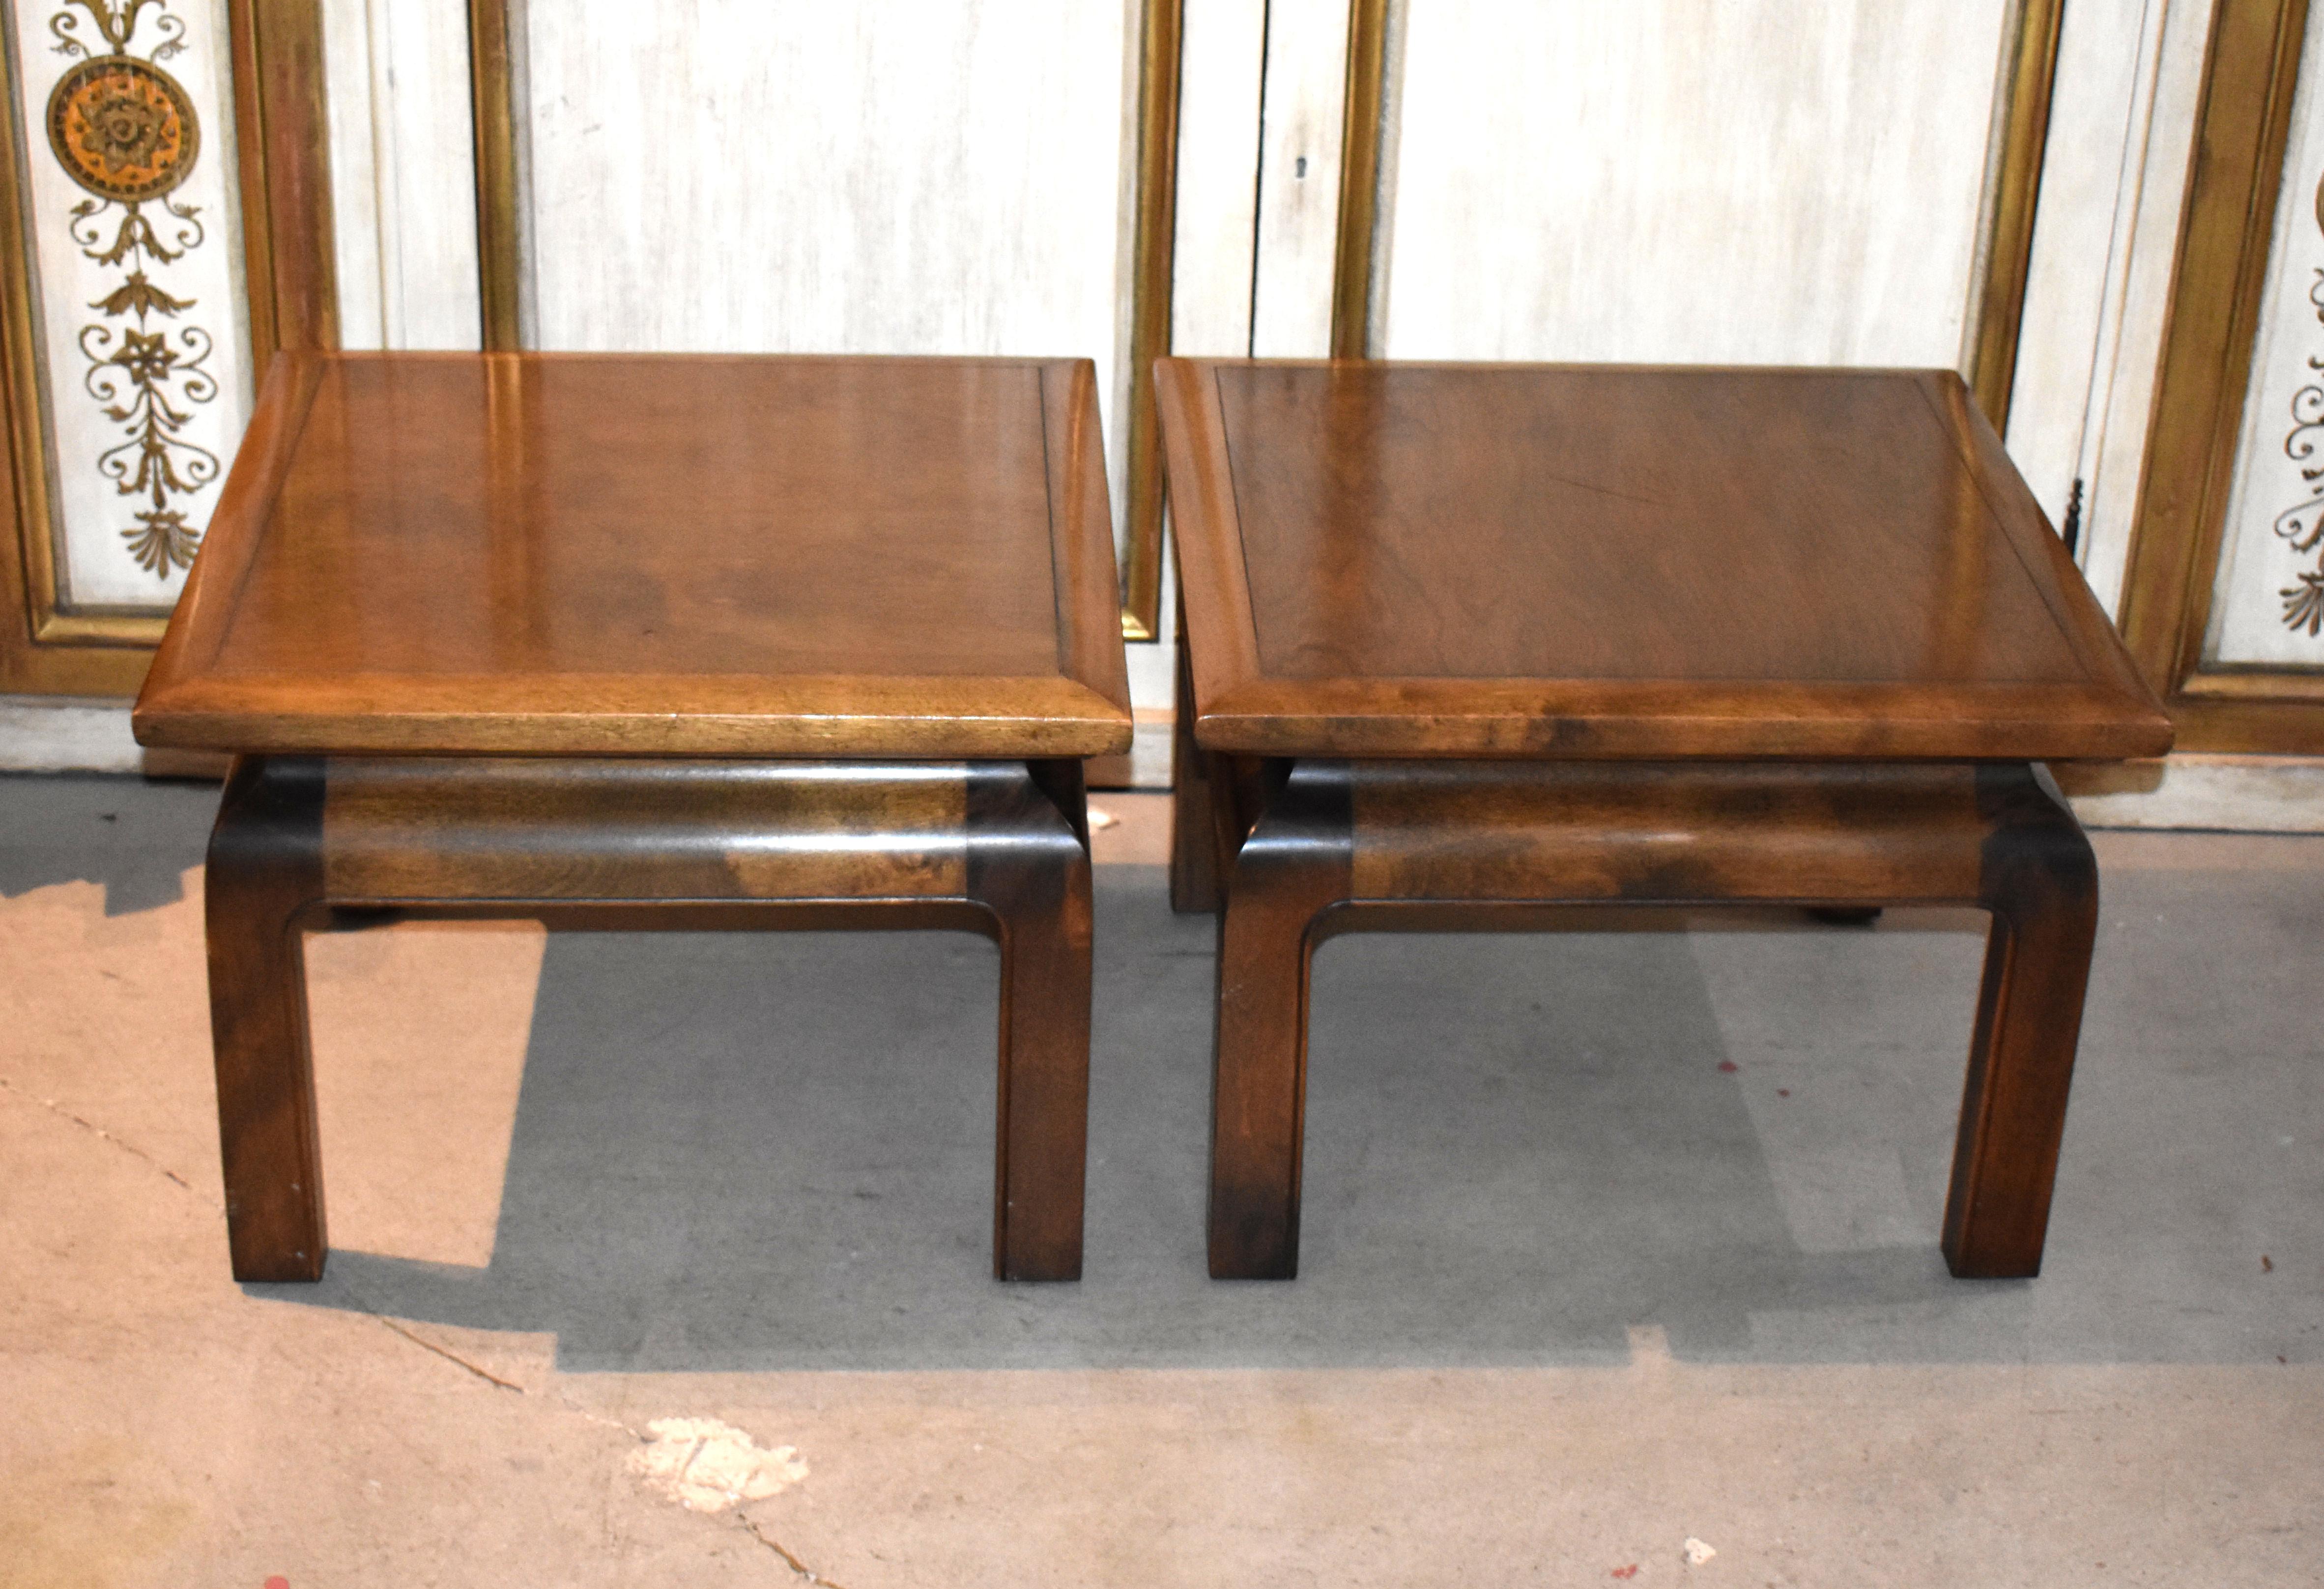 1965 Pair of walnut Asian style side tables by Albright & Zimmerman.